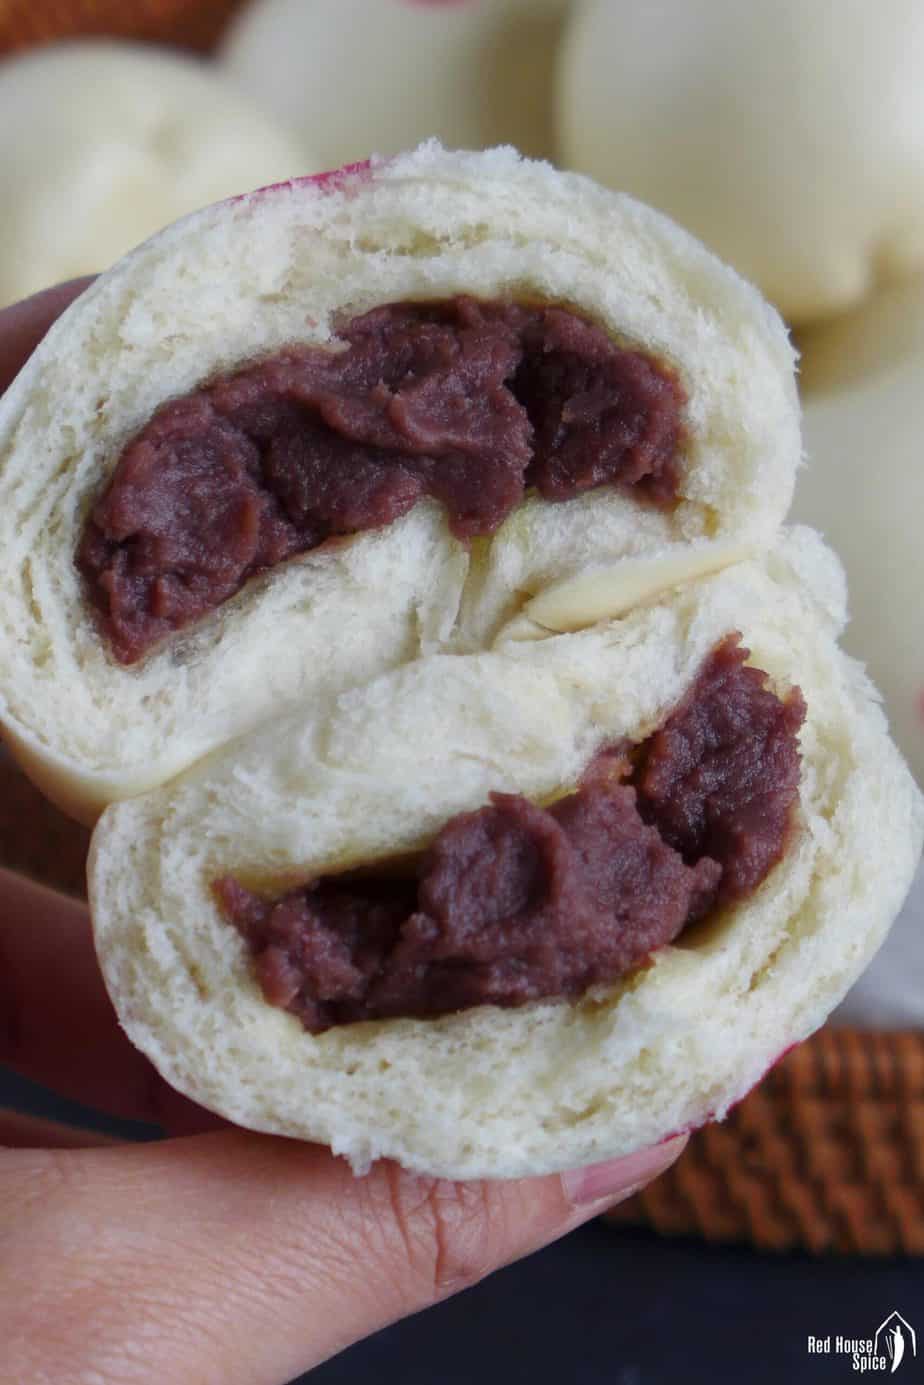 A steamed bun halved showing the red bean paste filling